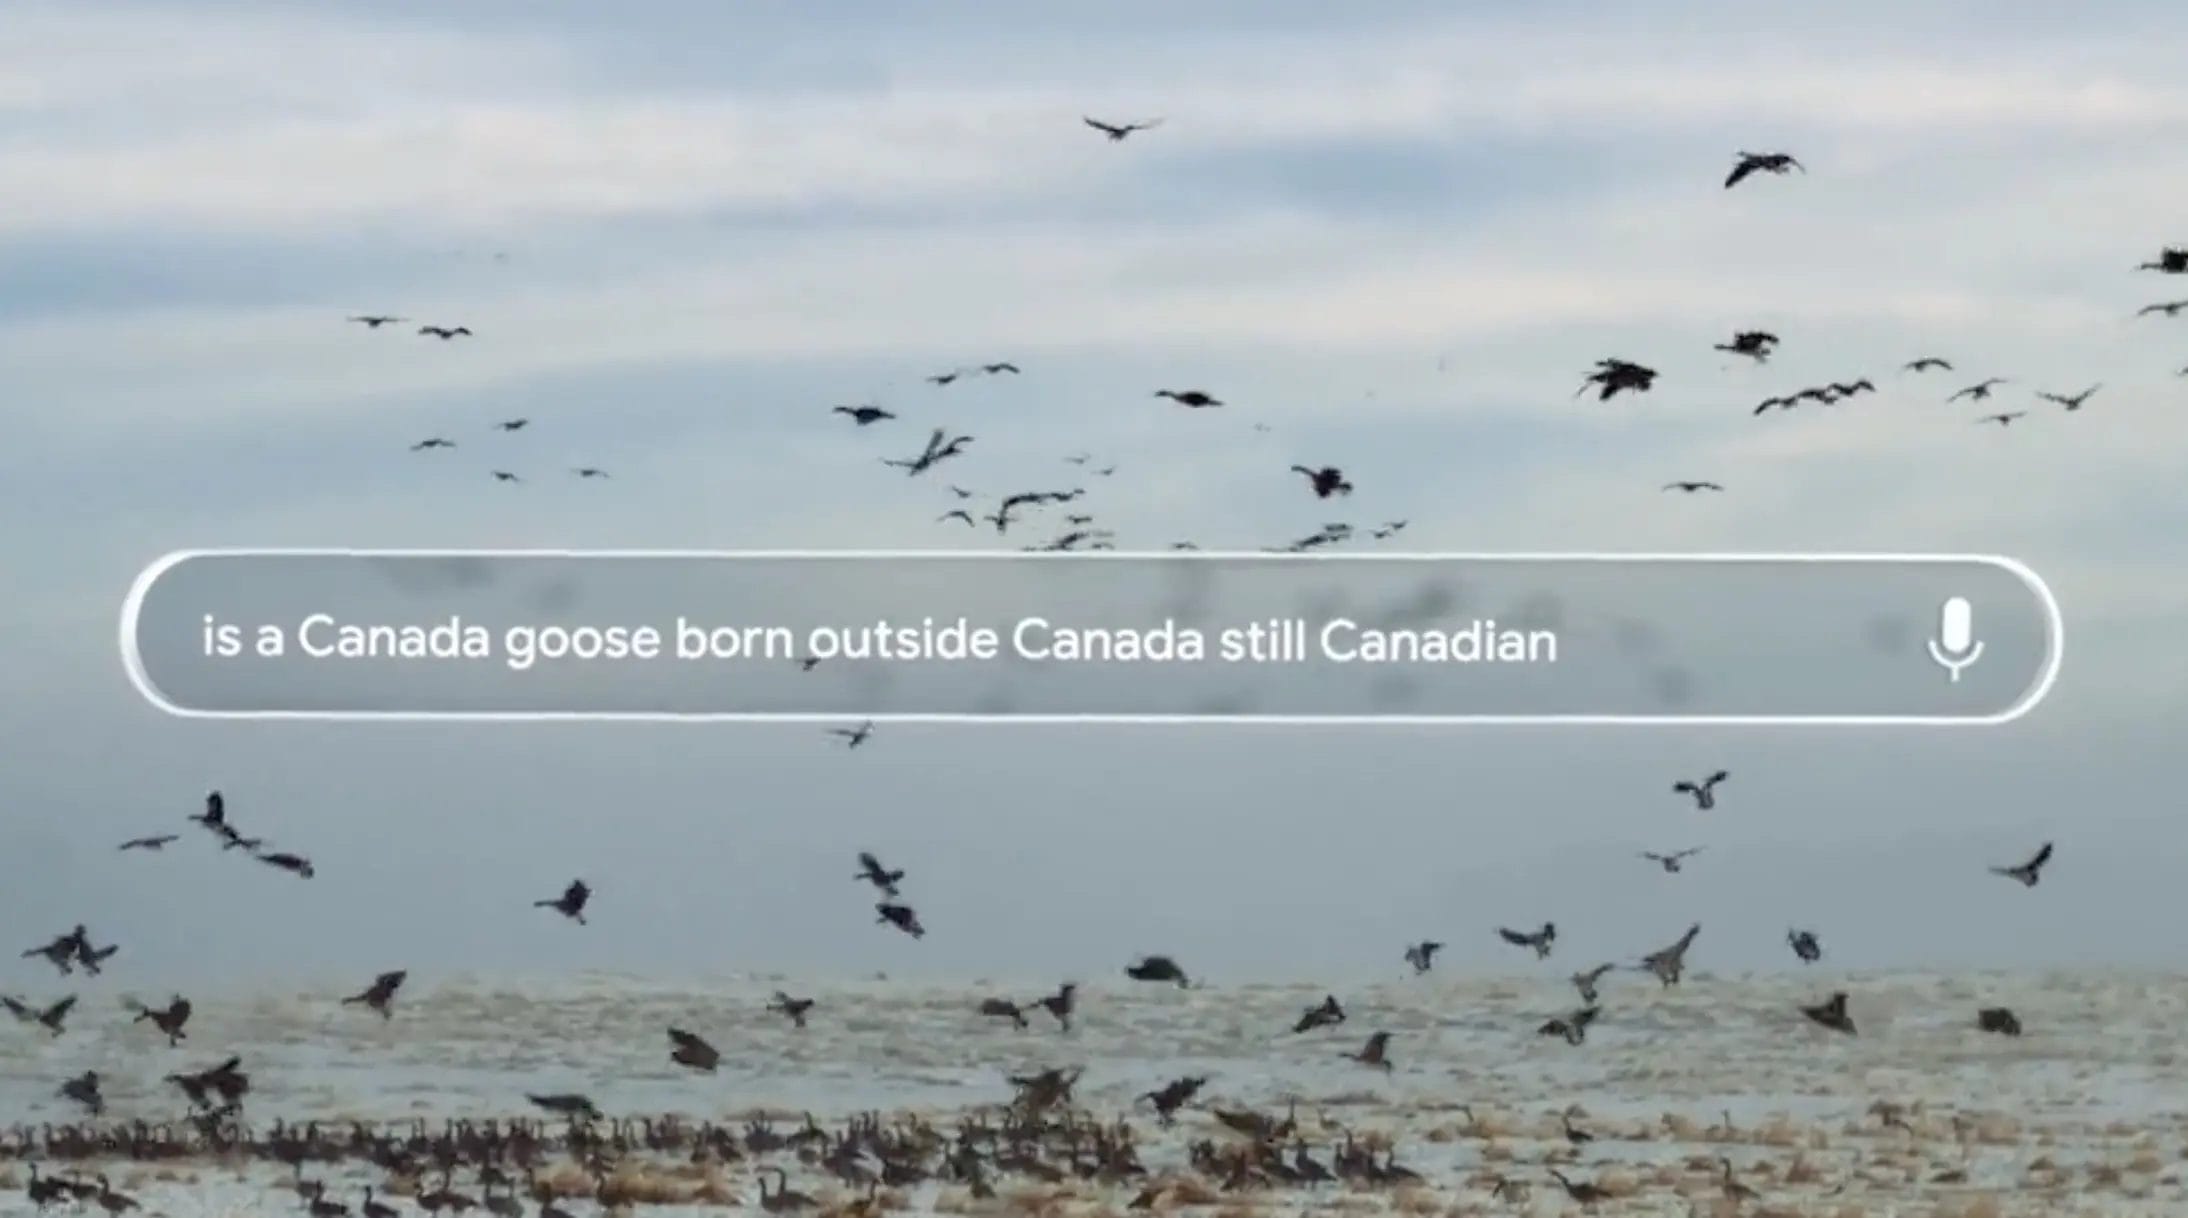 Are Canada Goose born outside of Canada, Canadian?